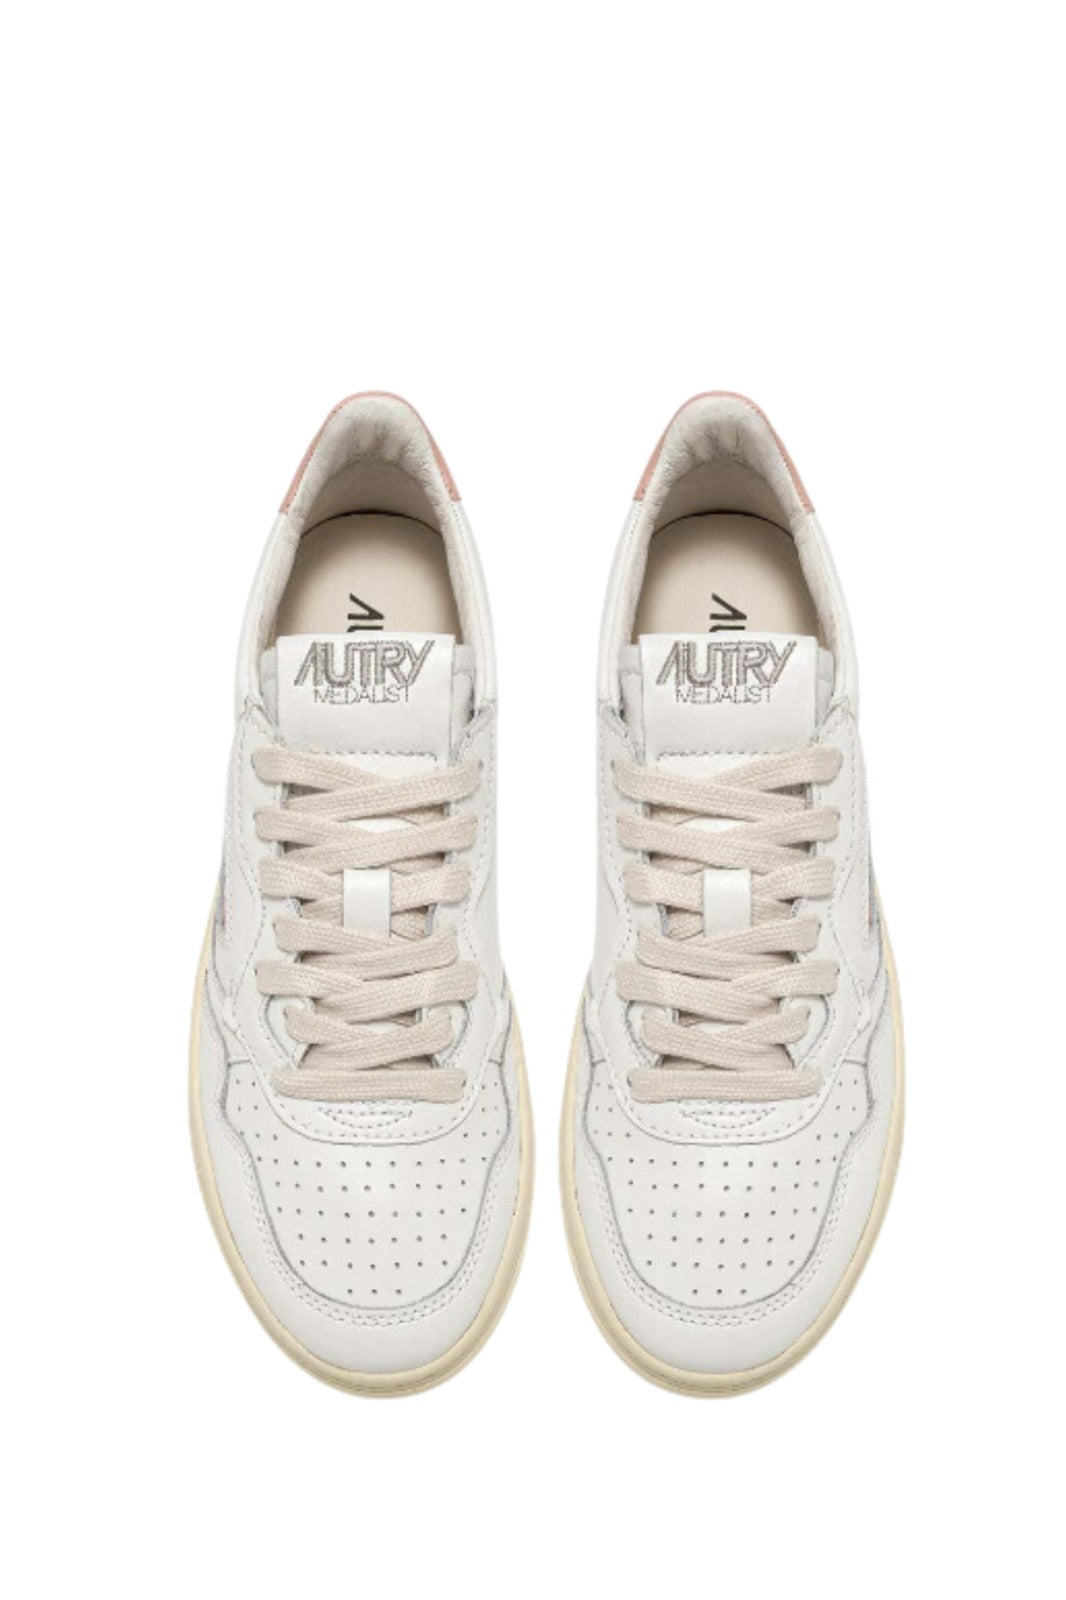 Autry 01 Sneakers Bianco/Rosa